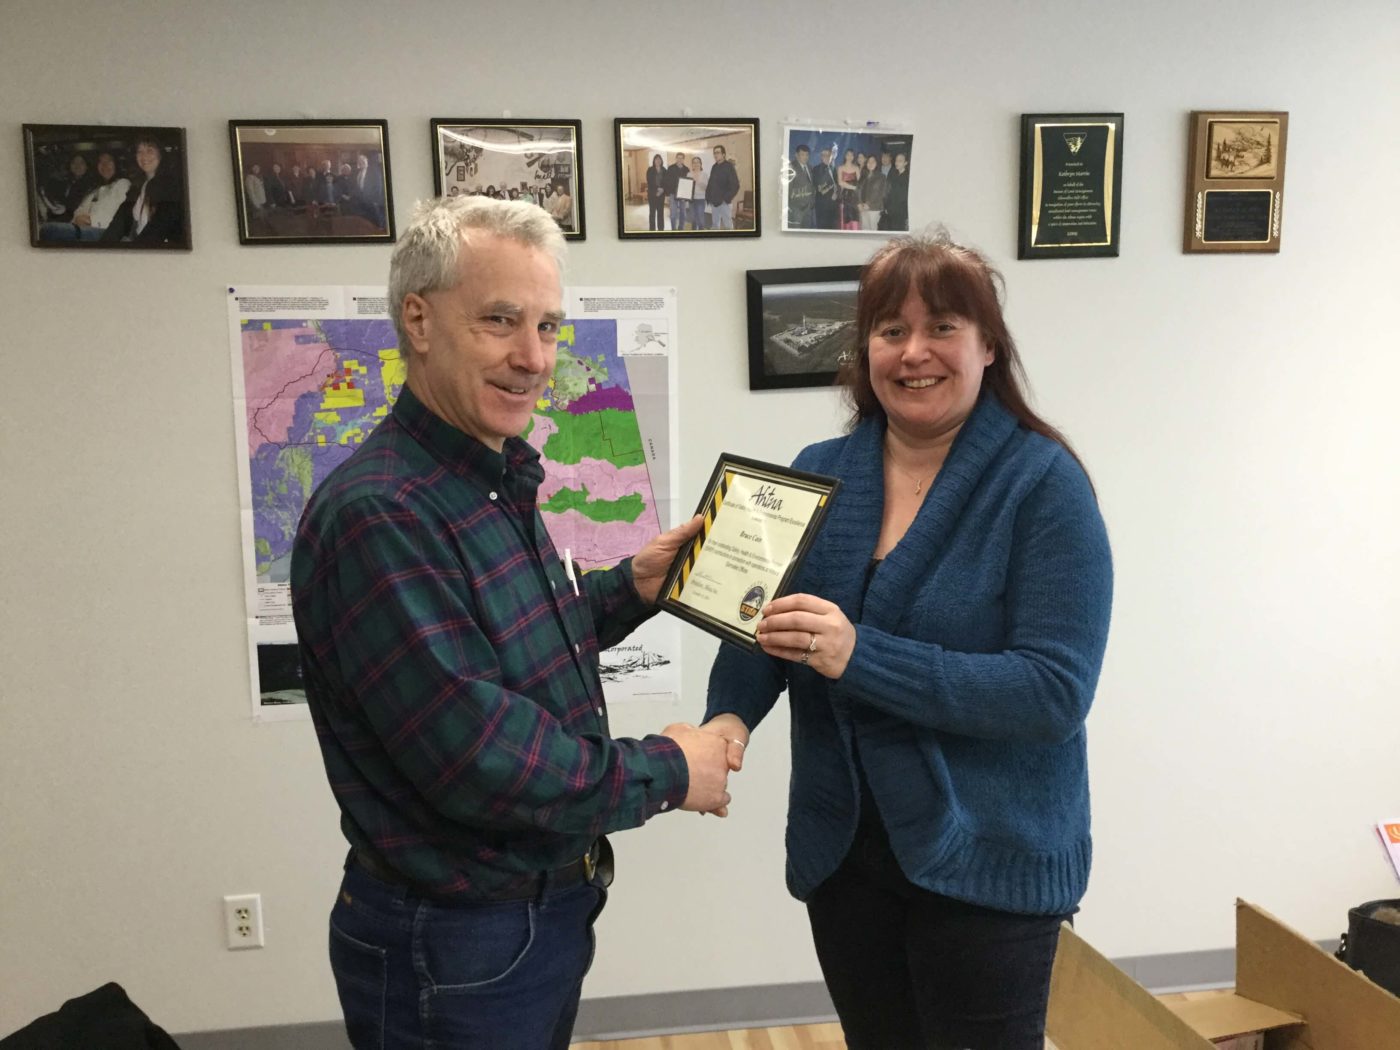 Special Projects Manager, Bruce Cain is presented with STAR Award by Senior VP, Kathryn Martin.